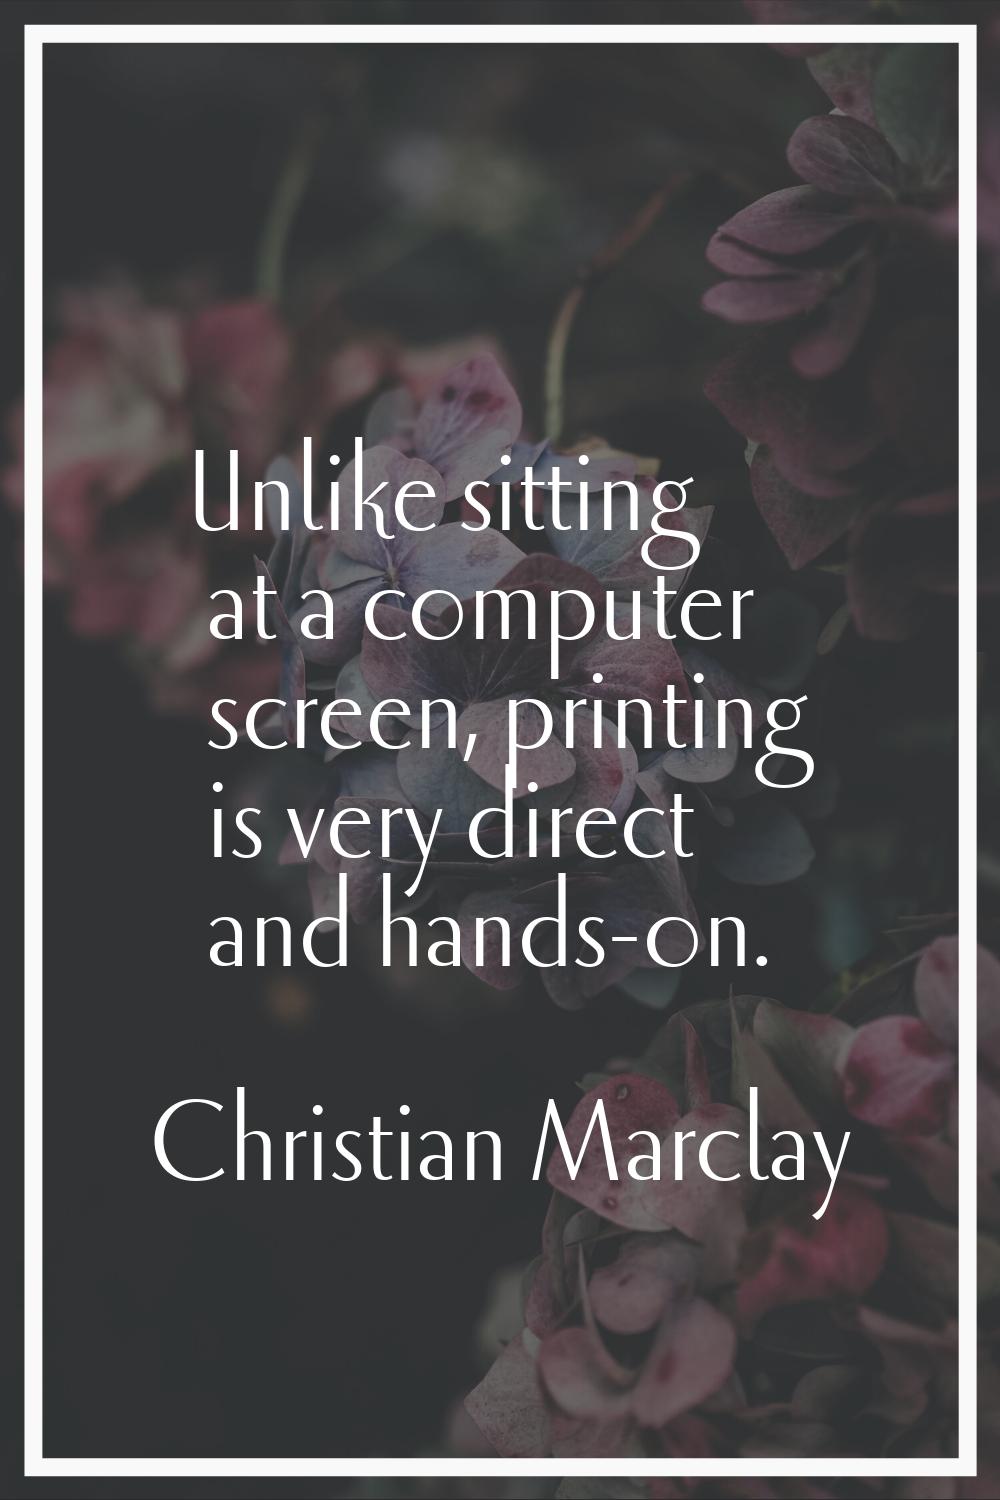 Unlike sitting at a computer screen, printing is very direct and hands-on.